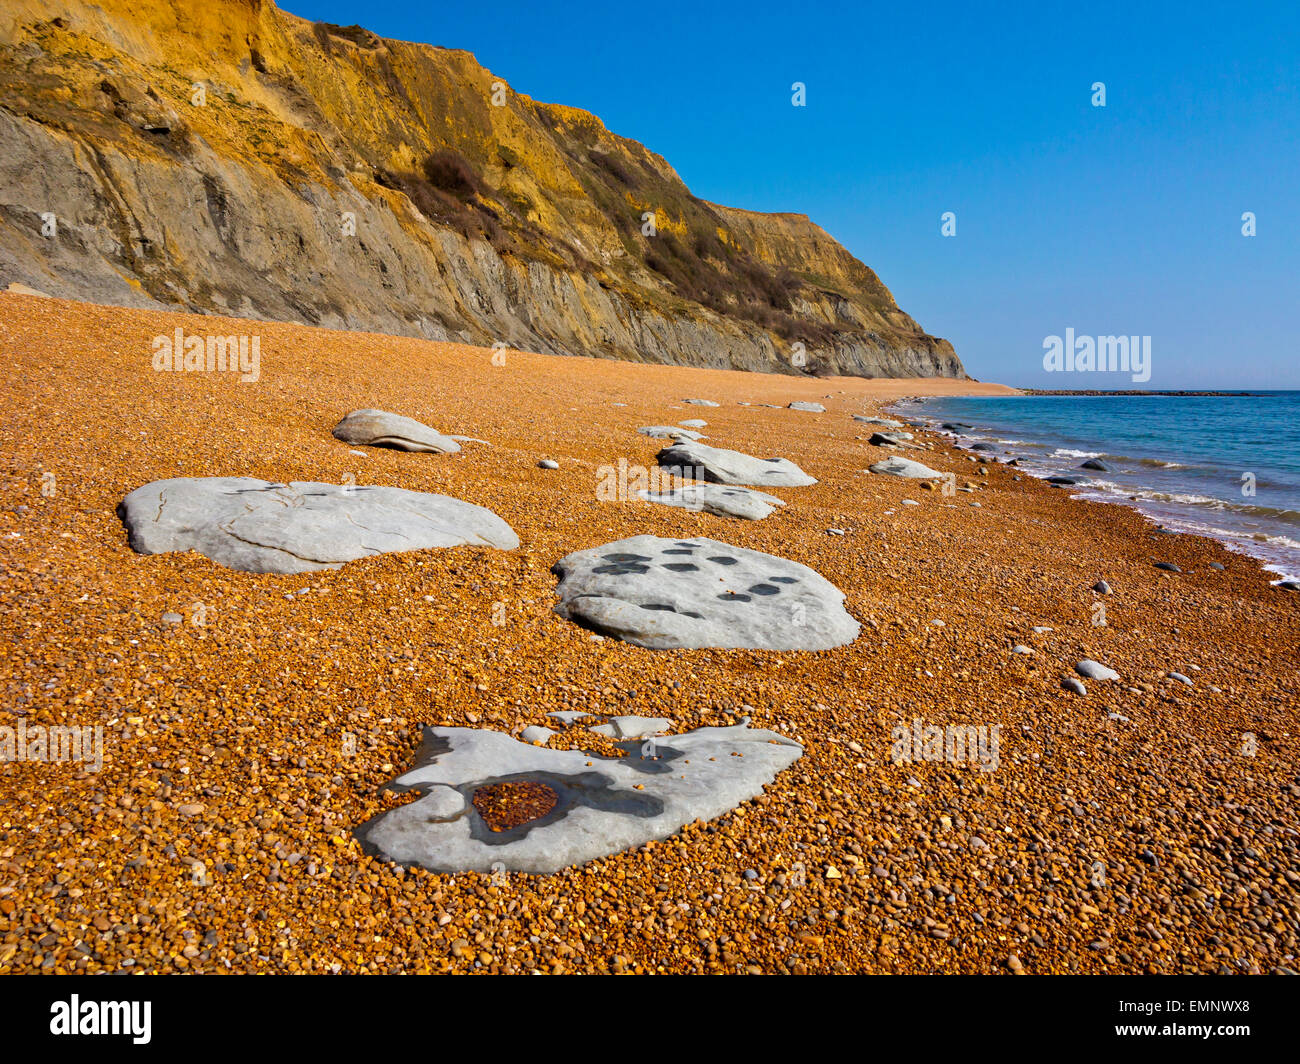 View looking east on the shingle beach at Seatown on the Jurassic Coast in West Dorset England UK Stock Photo